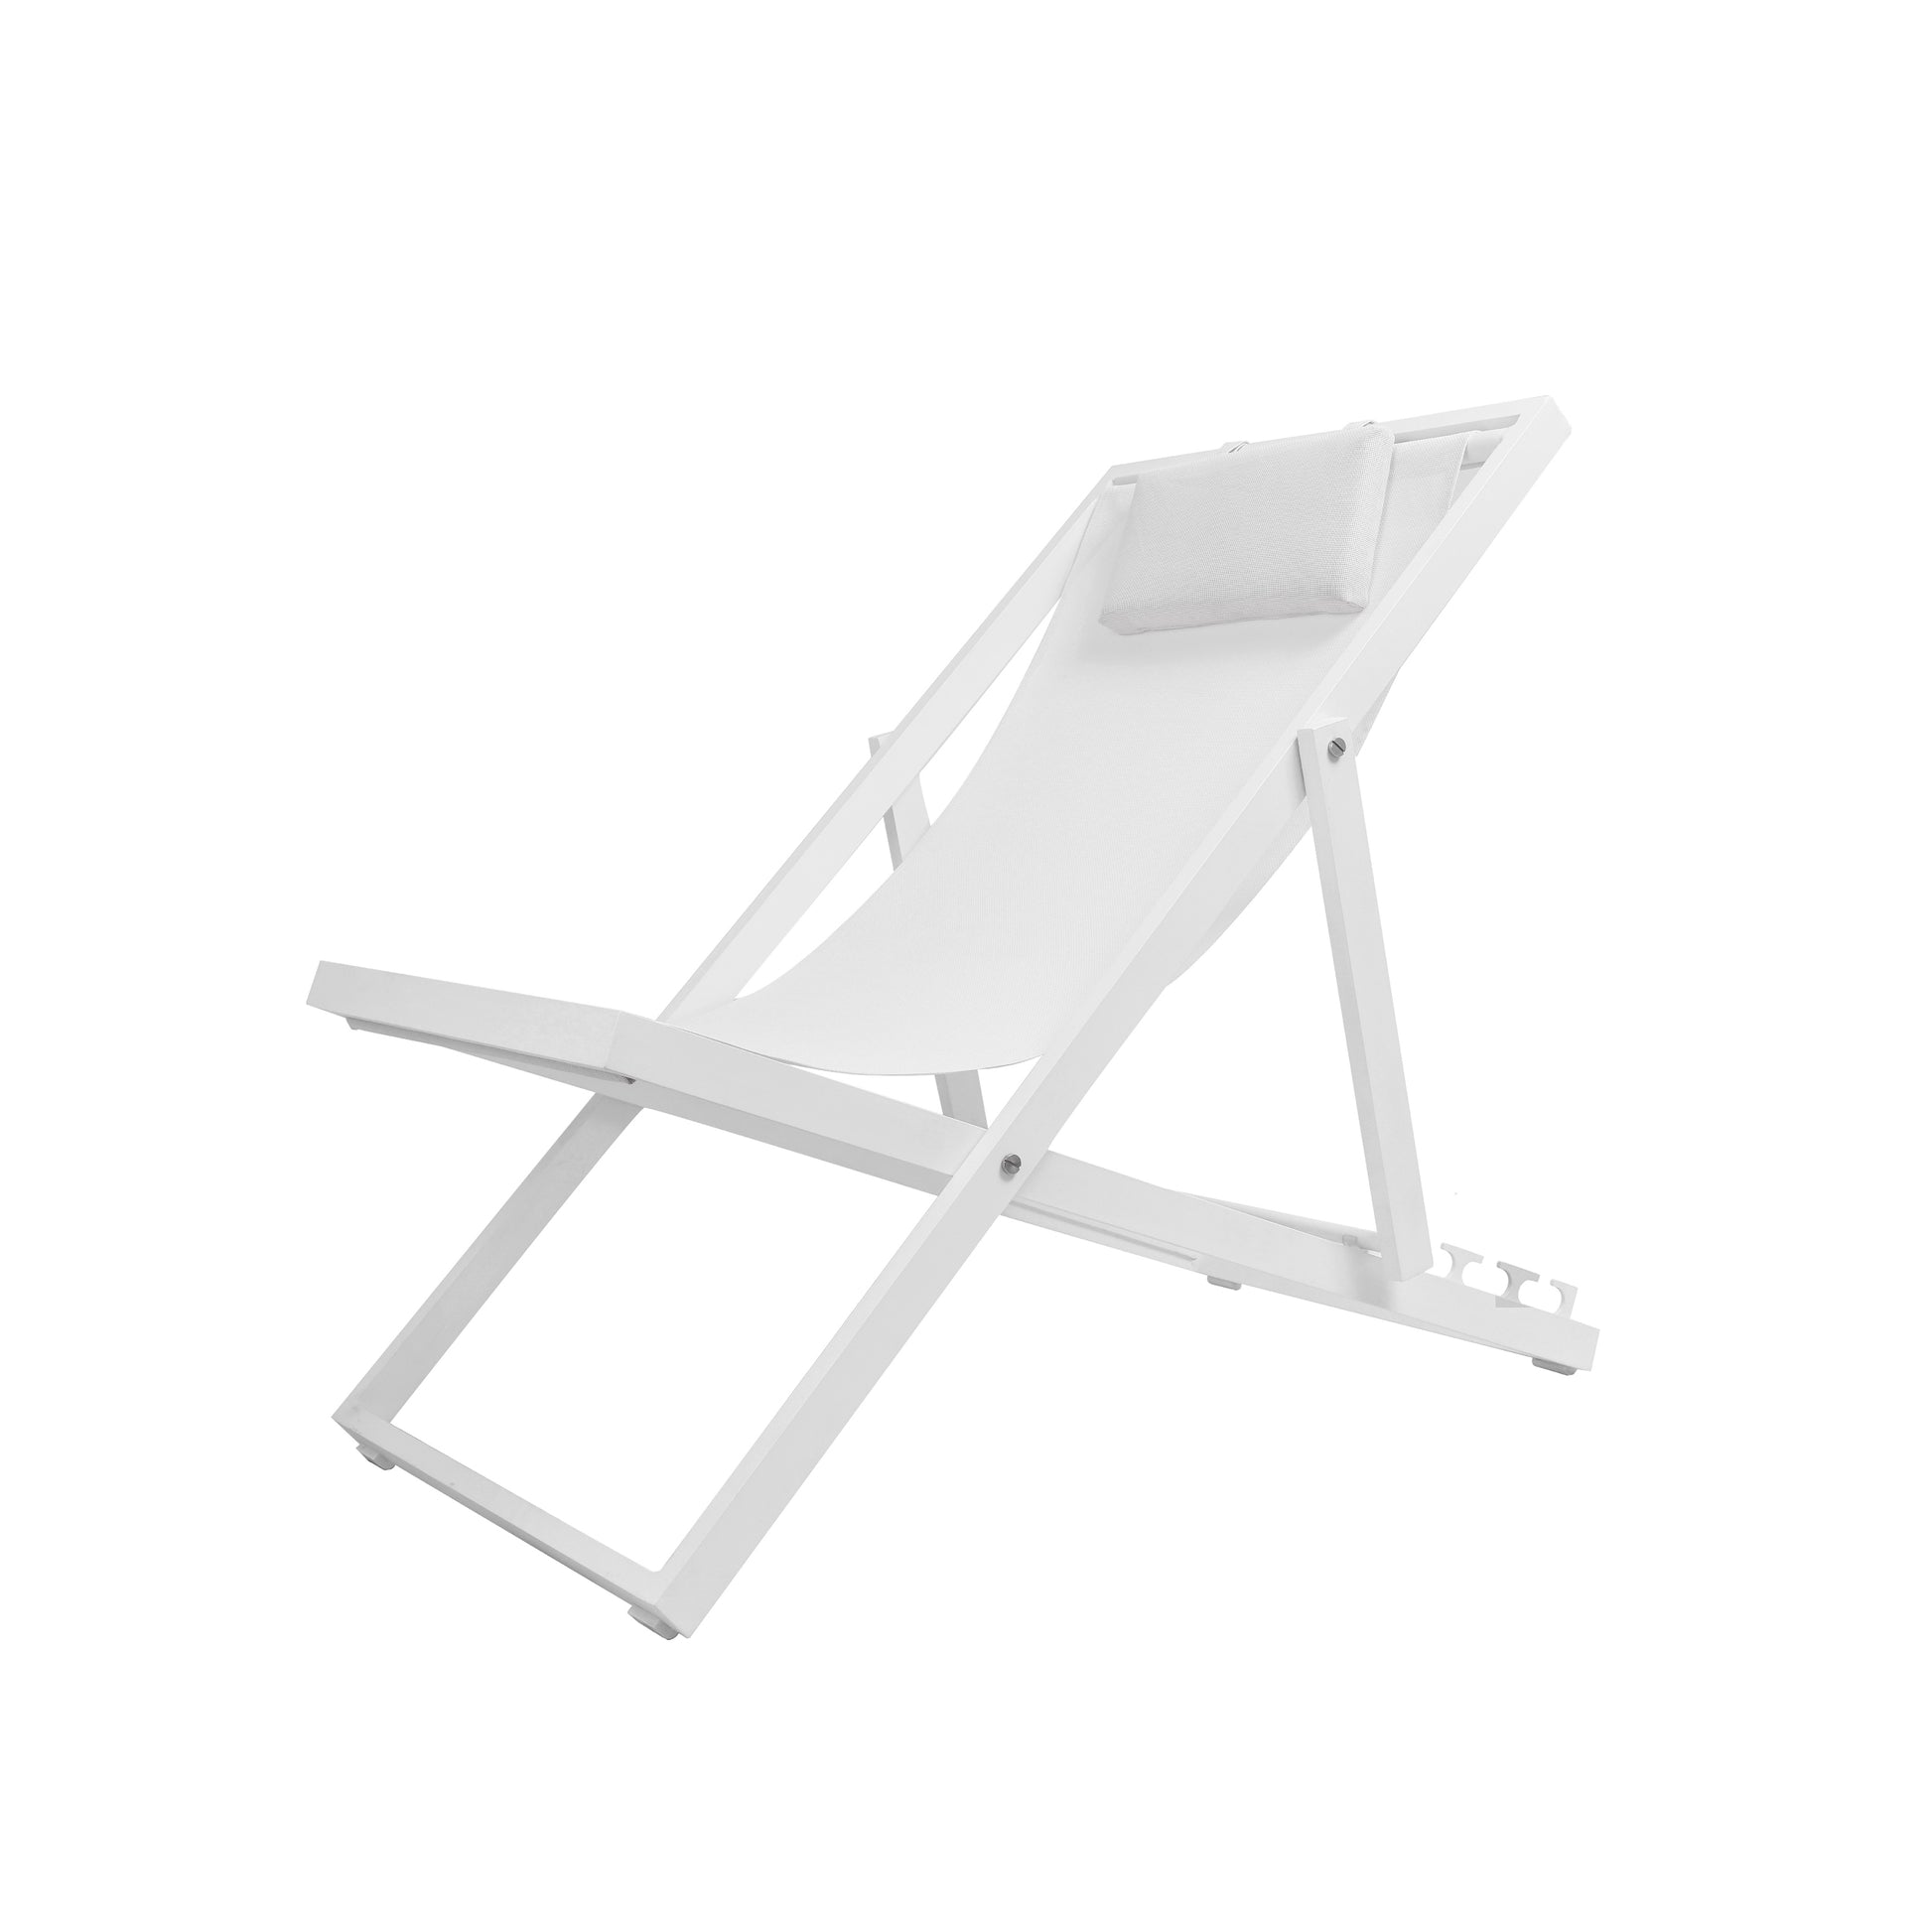 New Port Aluminium Outdoor Lounging Chair with Fabric Sling